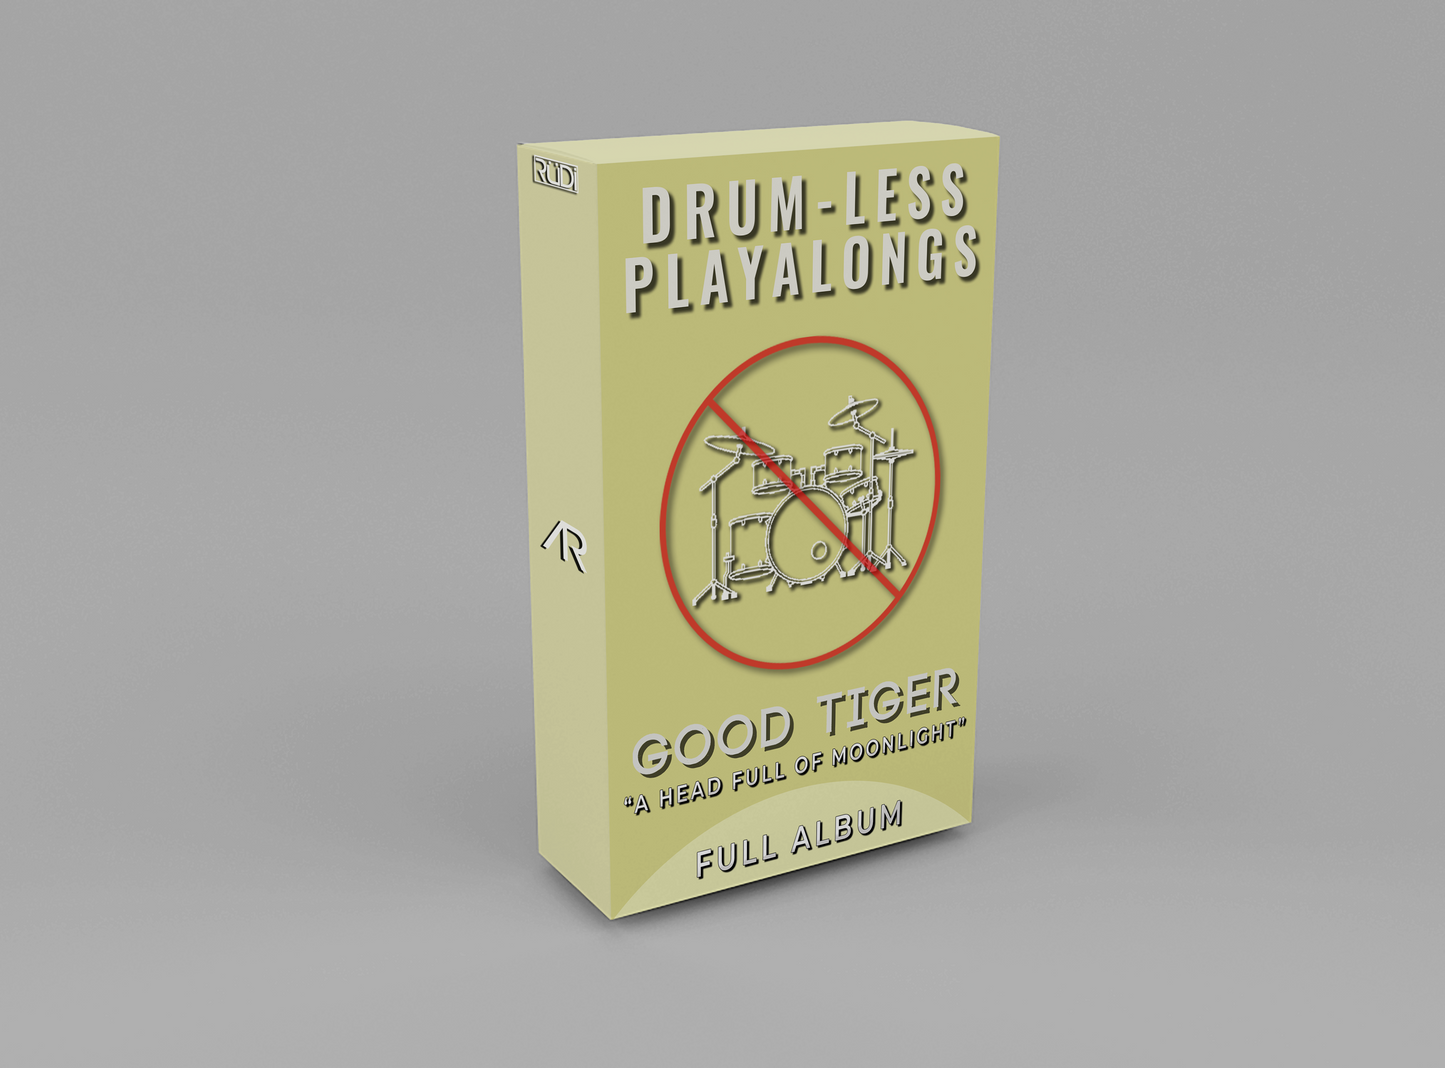 DRUM-LESS PLAYALONGS - A Head Full Of Moonlight (FULL ALBUM) by Good Tiger